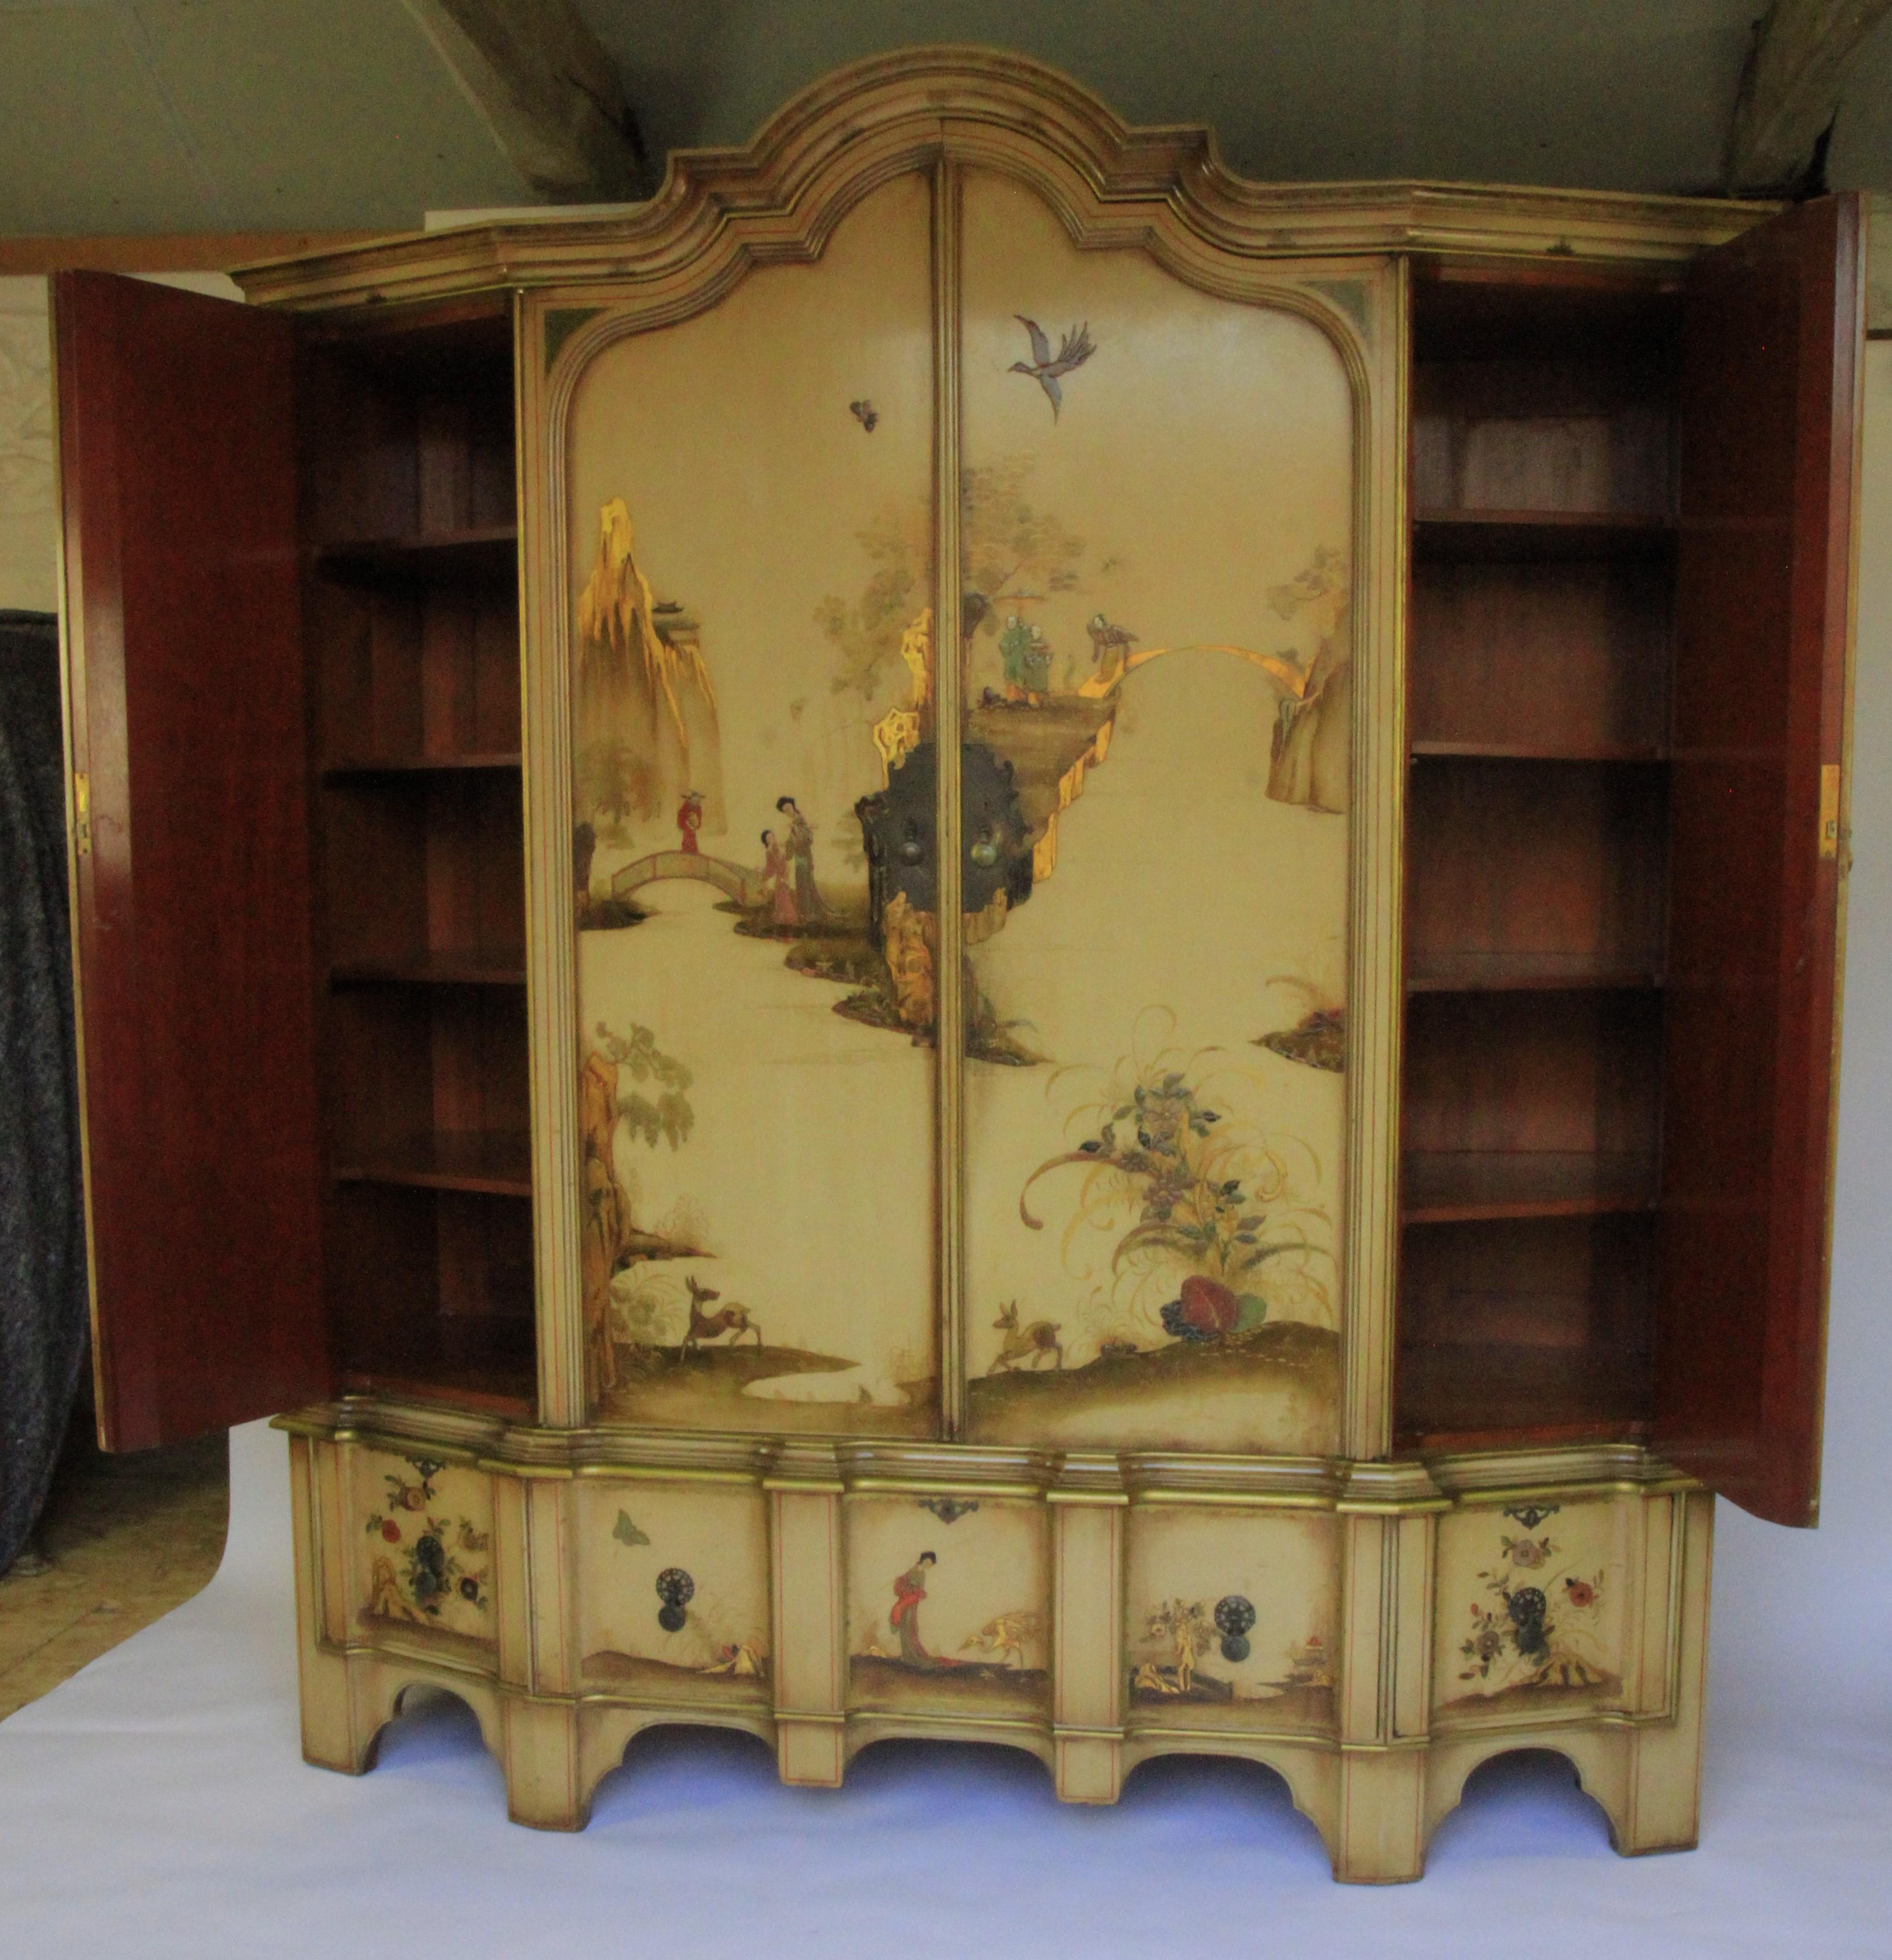 Fine Chinoiserie Decorated 8 piece Bedroom Suite circa 1900
Waring & Gillow Badges 
[1] 4 door wardrobe centre hanging space, fitted shelves each side,
3 drawer base
[2] Dressing Table with 7 Drawers
[3] Freestanding Triptych Dressing Mirror with